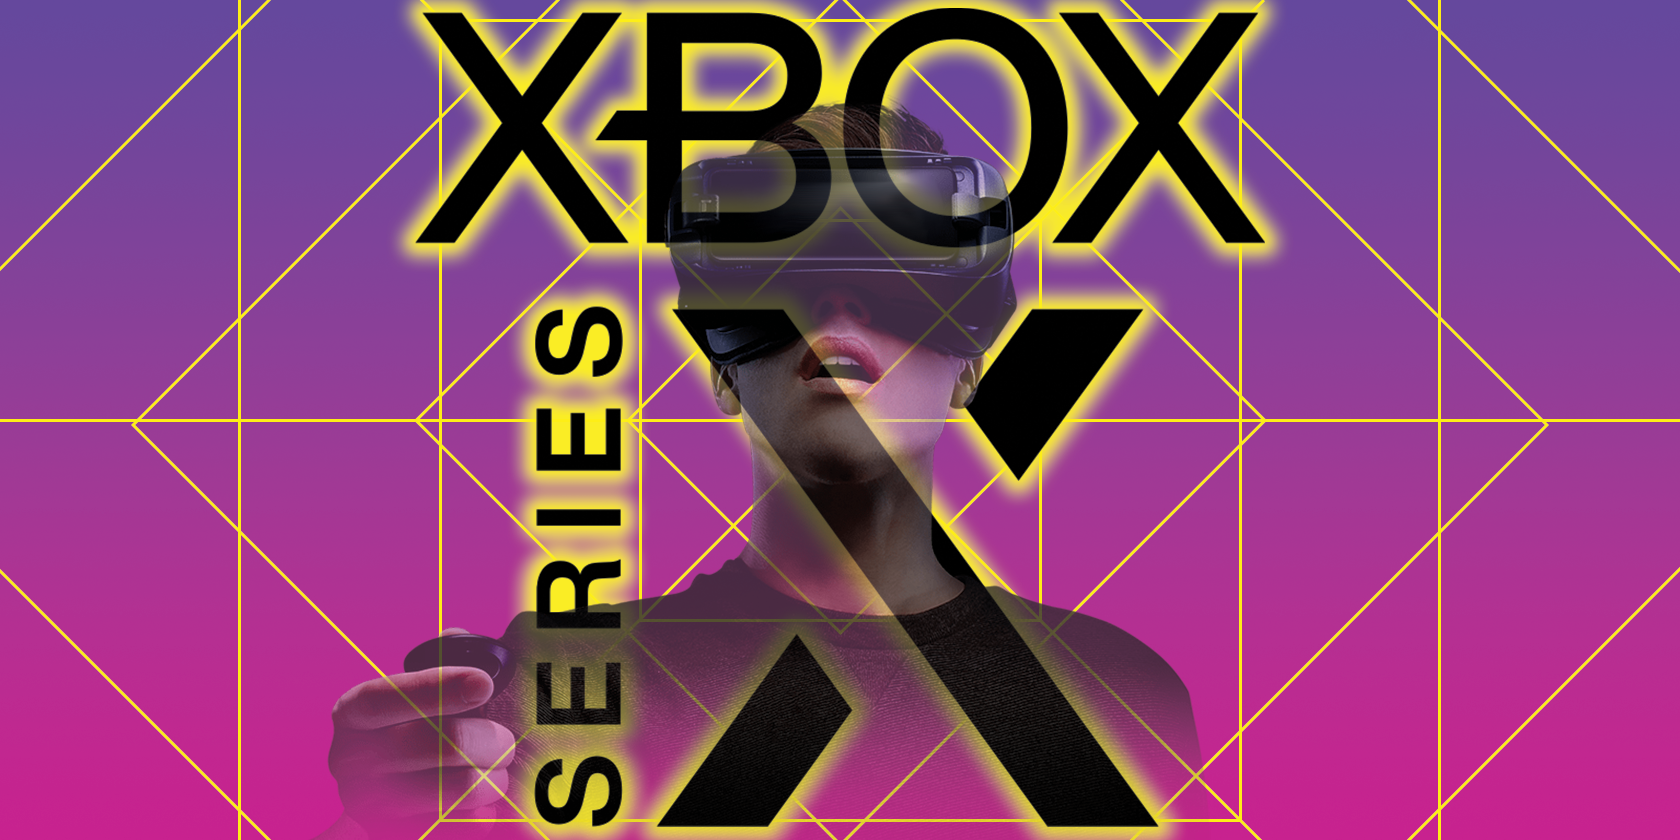 Is Microsoft Developing a VR Headset for the Xbox Series X/S?